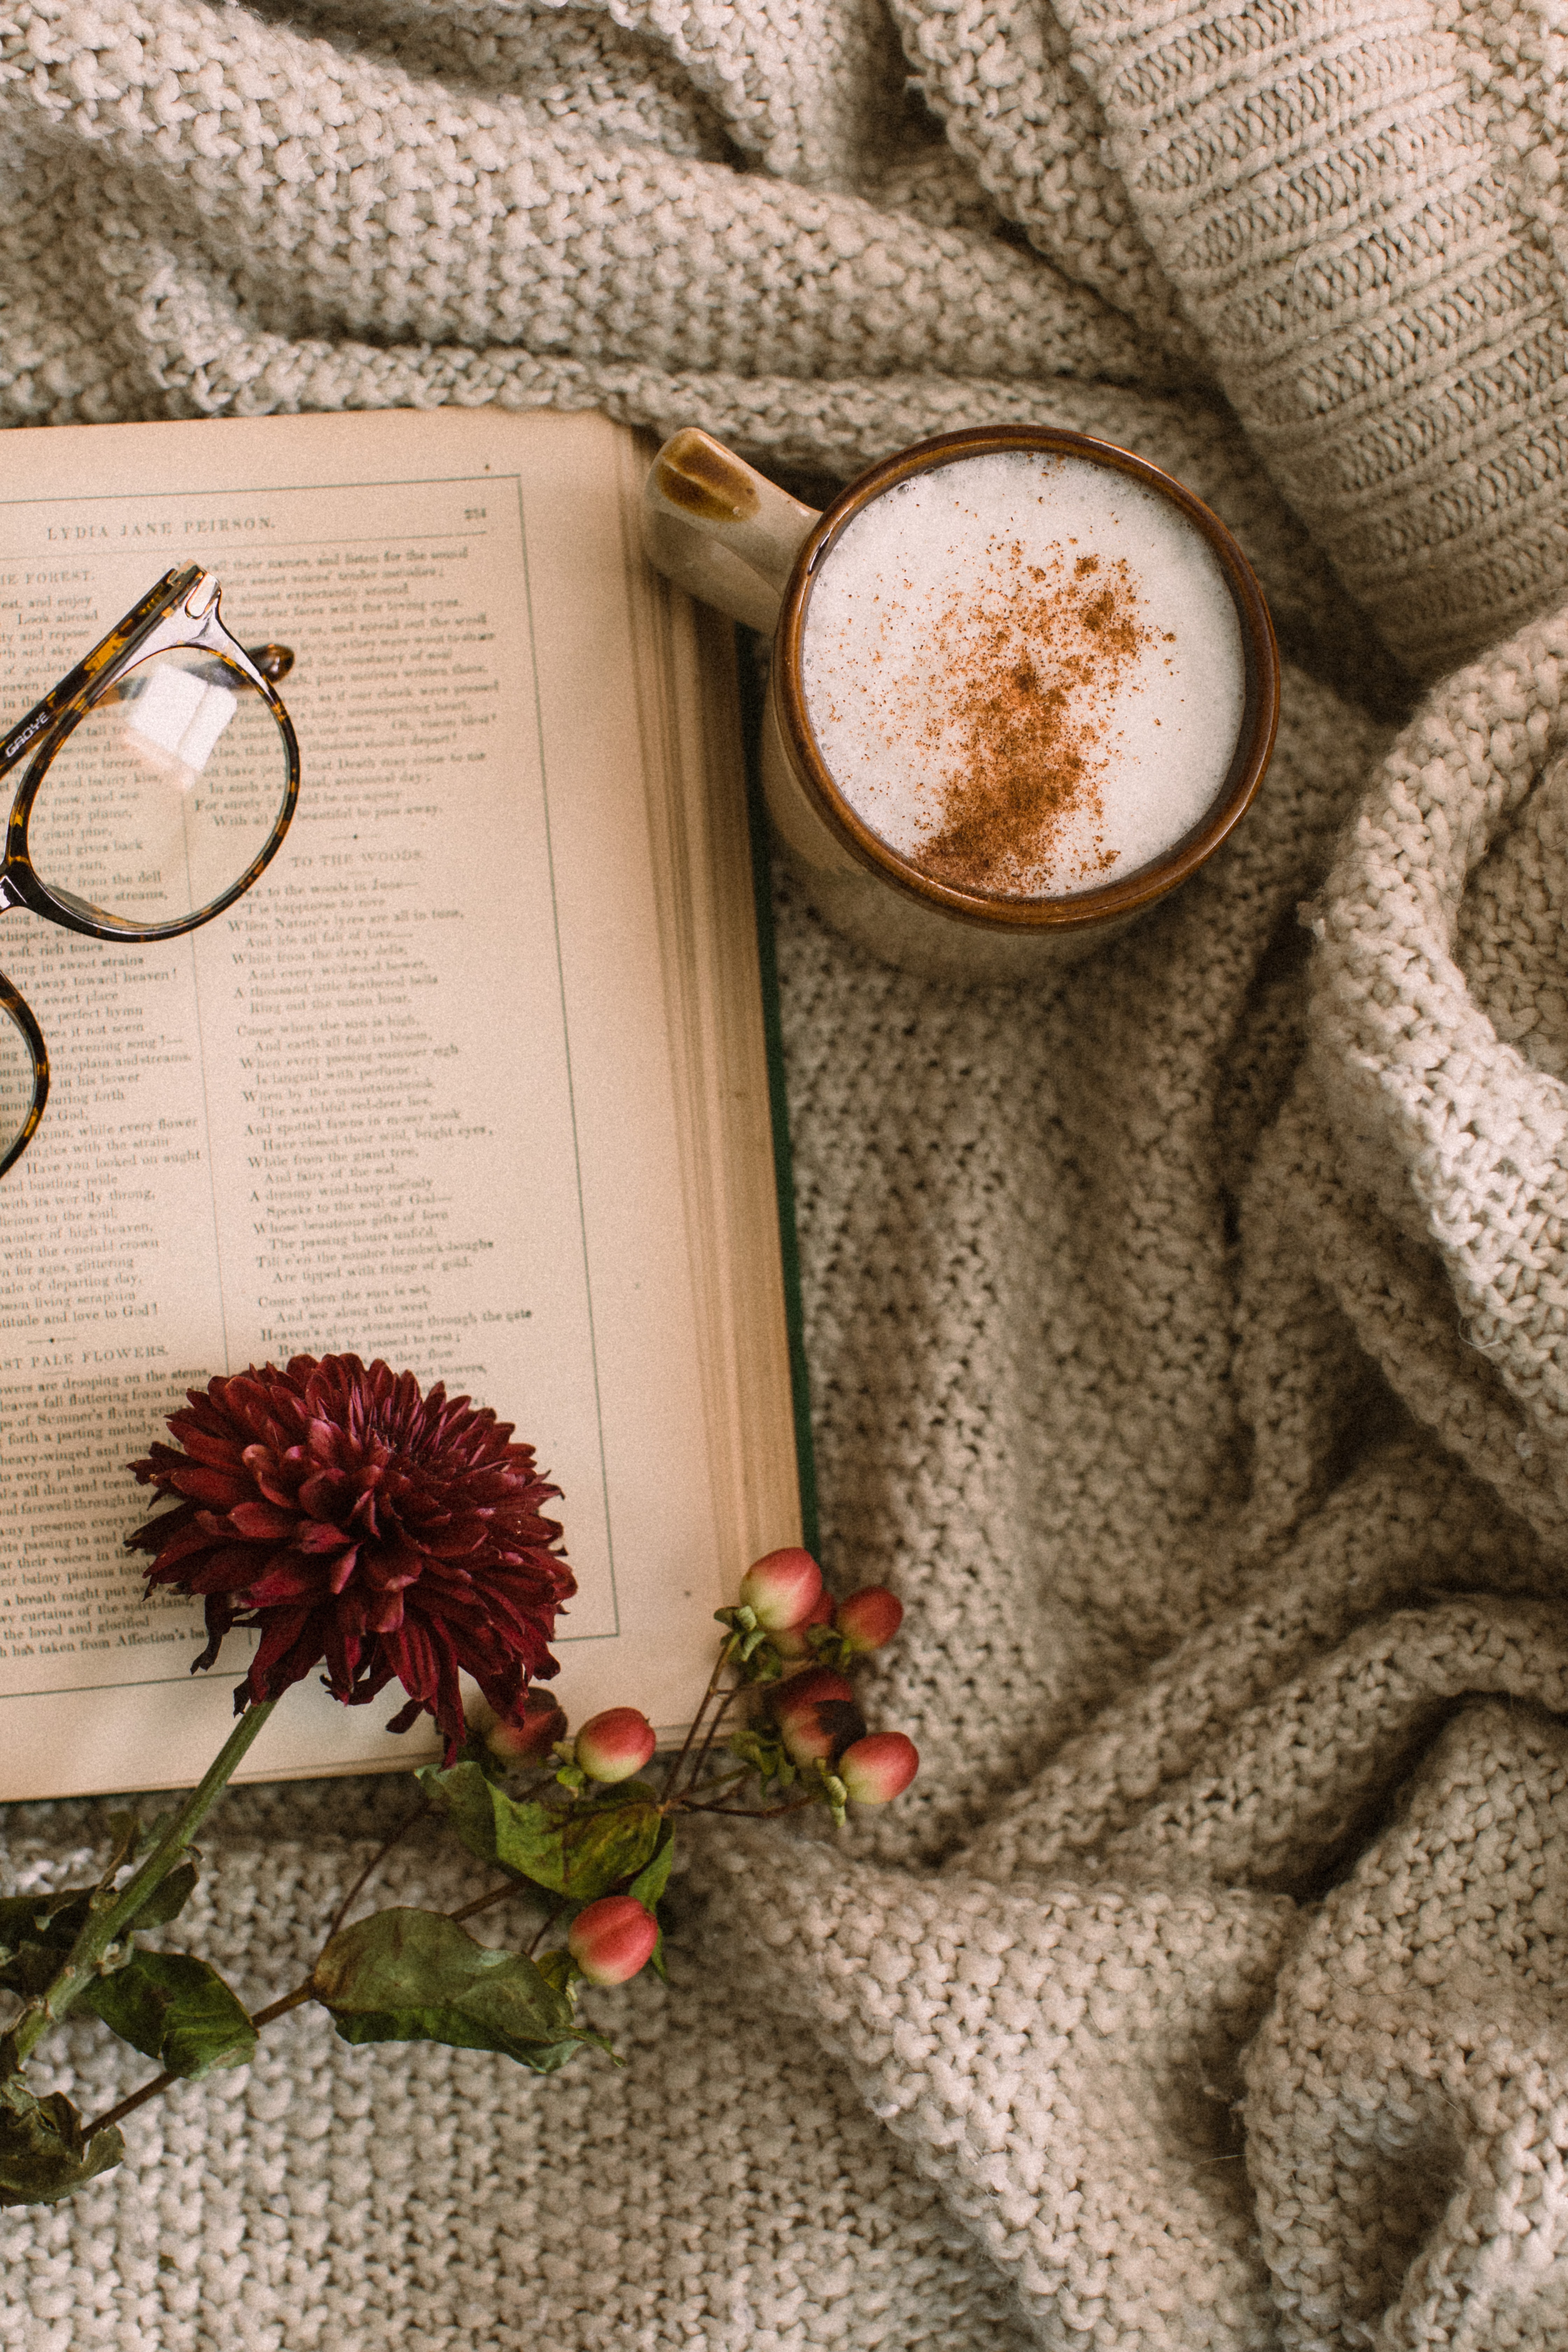 vertical wallpaper book, food, cup, spectacles, flowers, coffee, cappuccino, glasses, mug